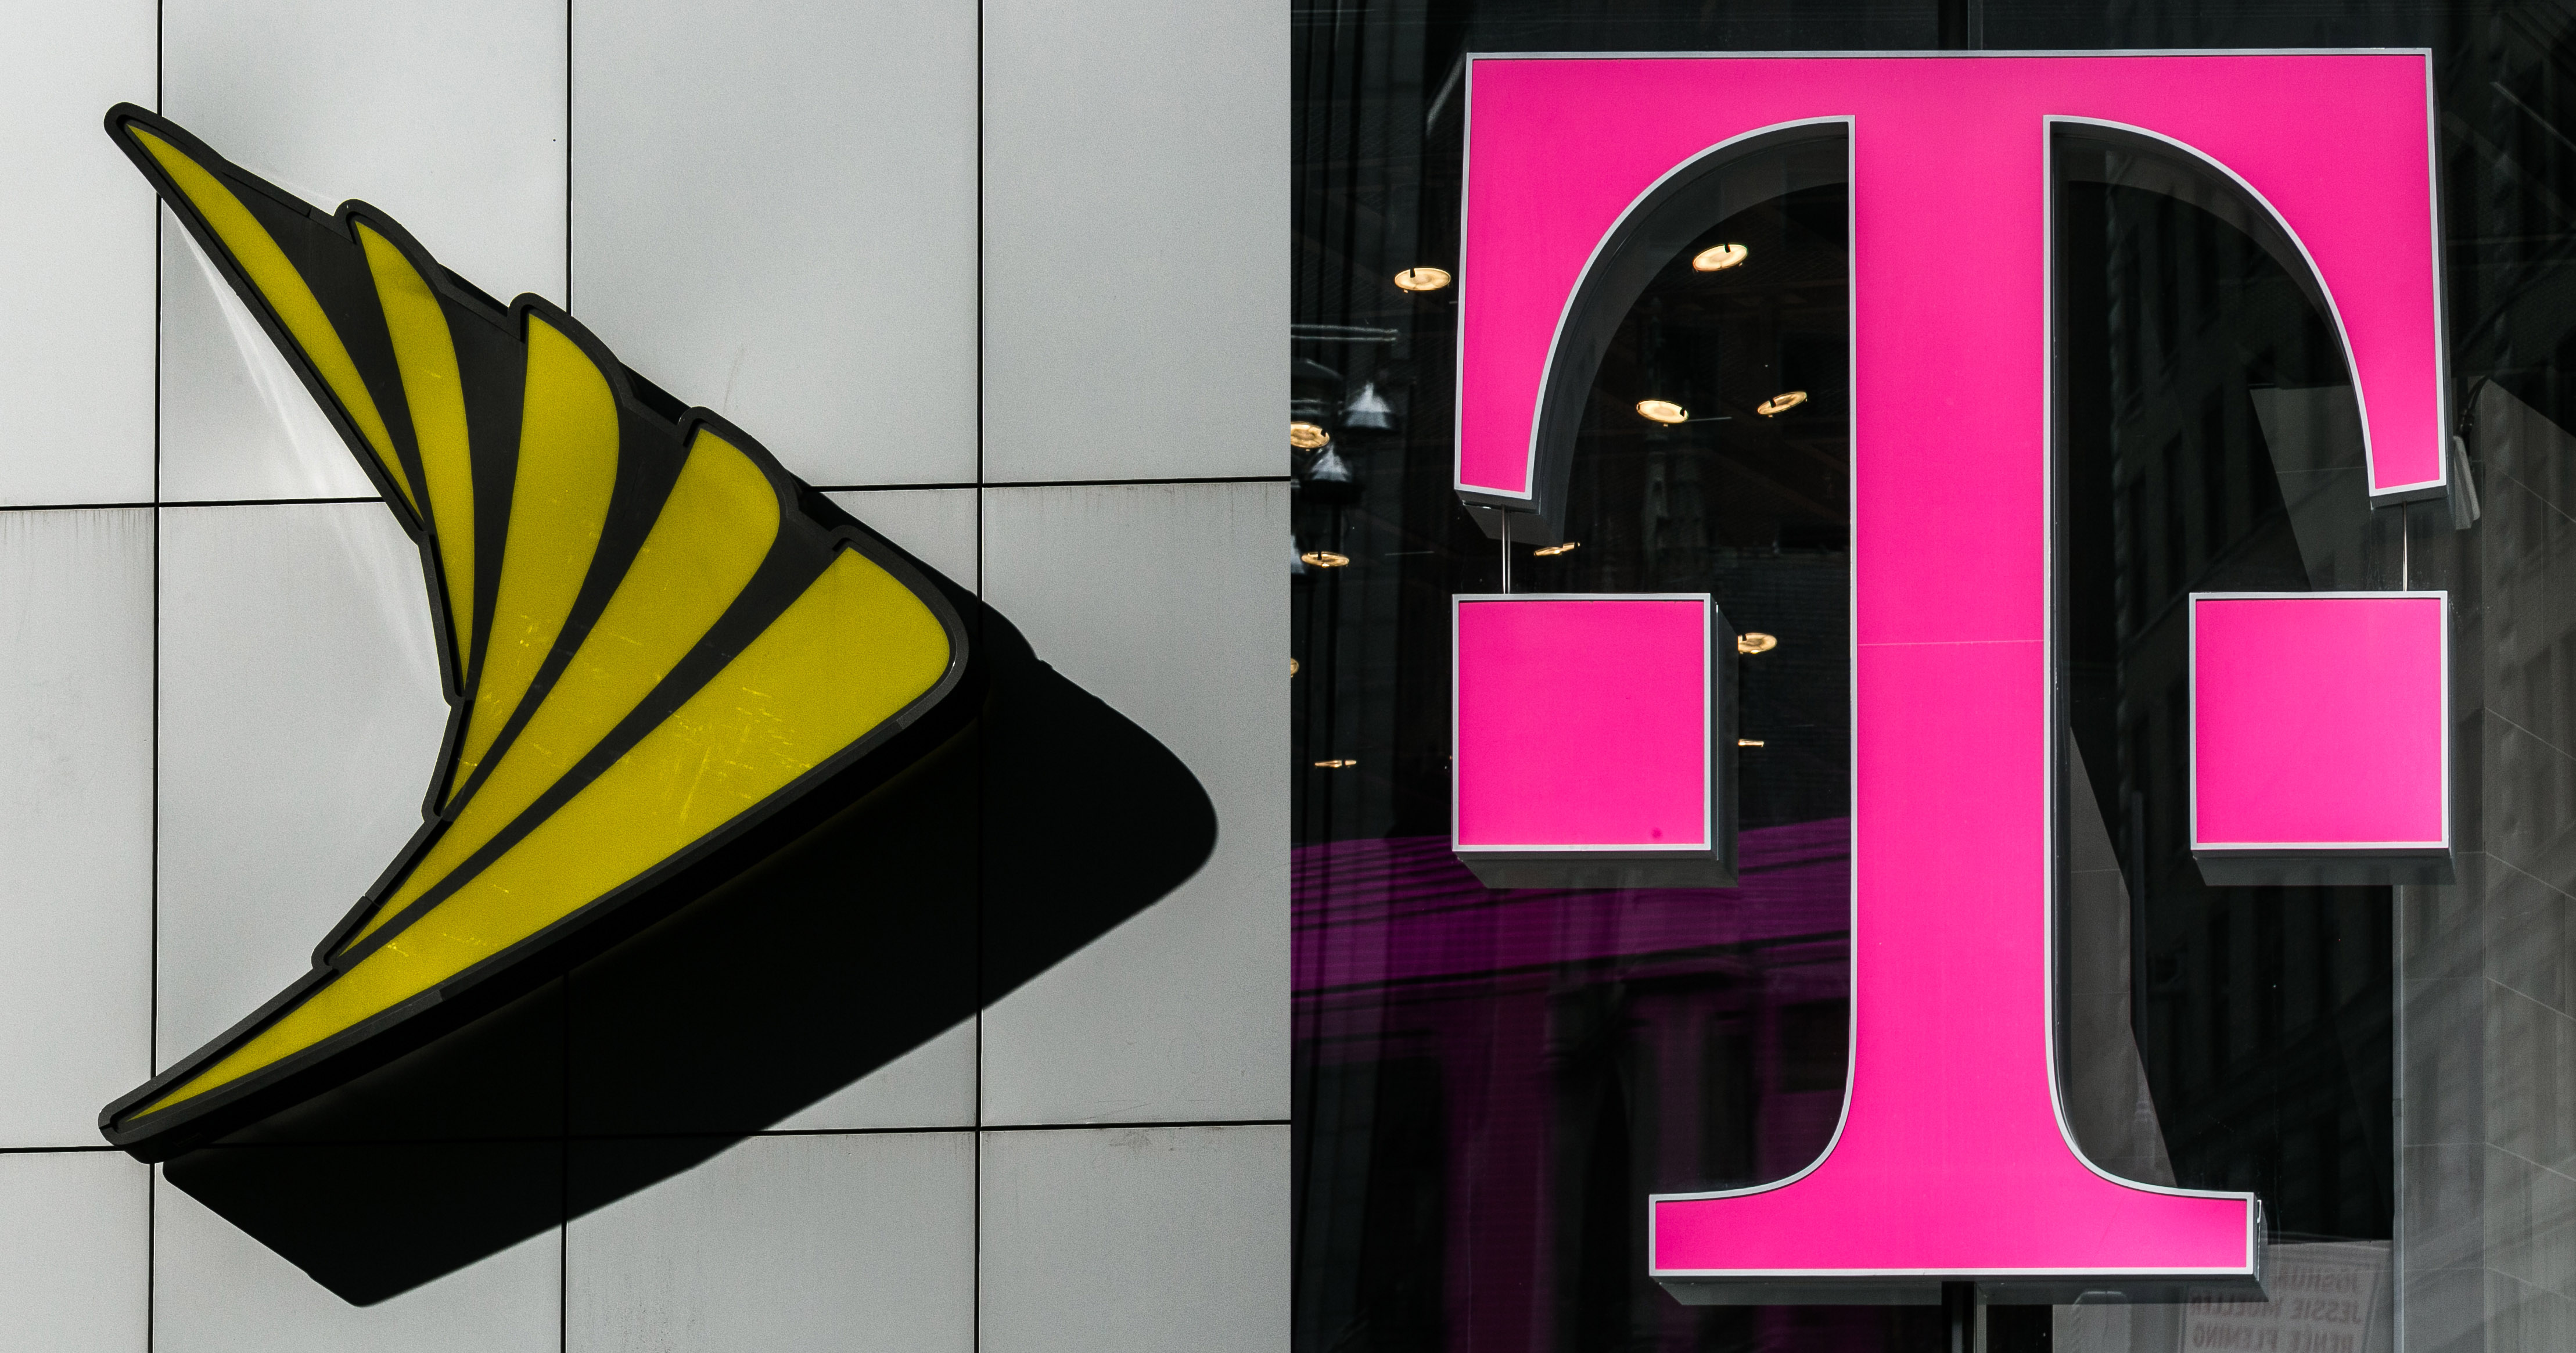 Sprint Corp. and T-Mobile